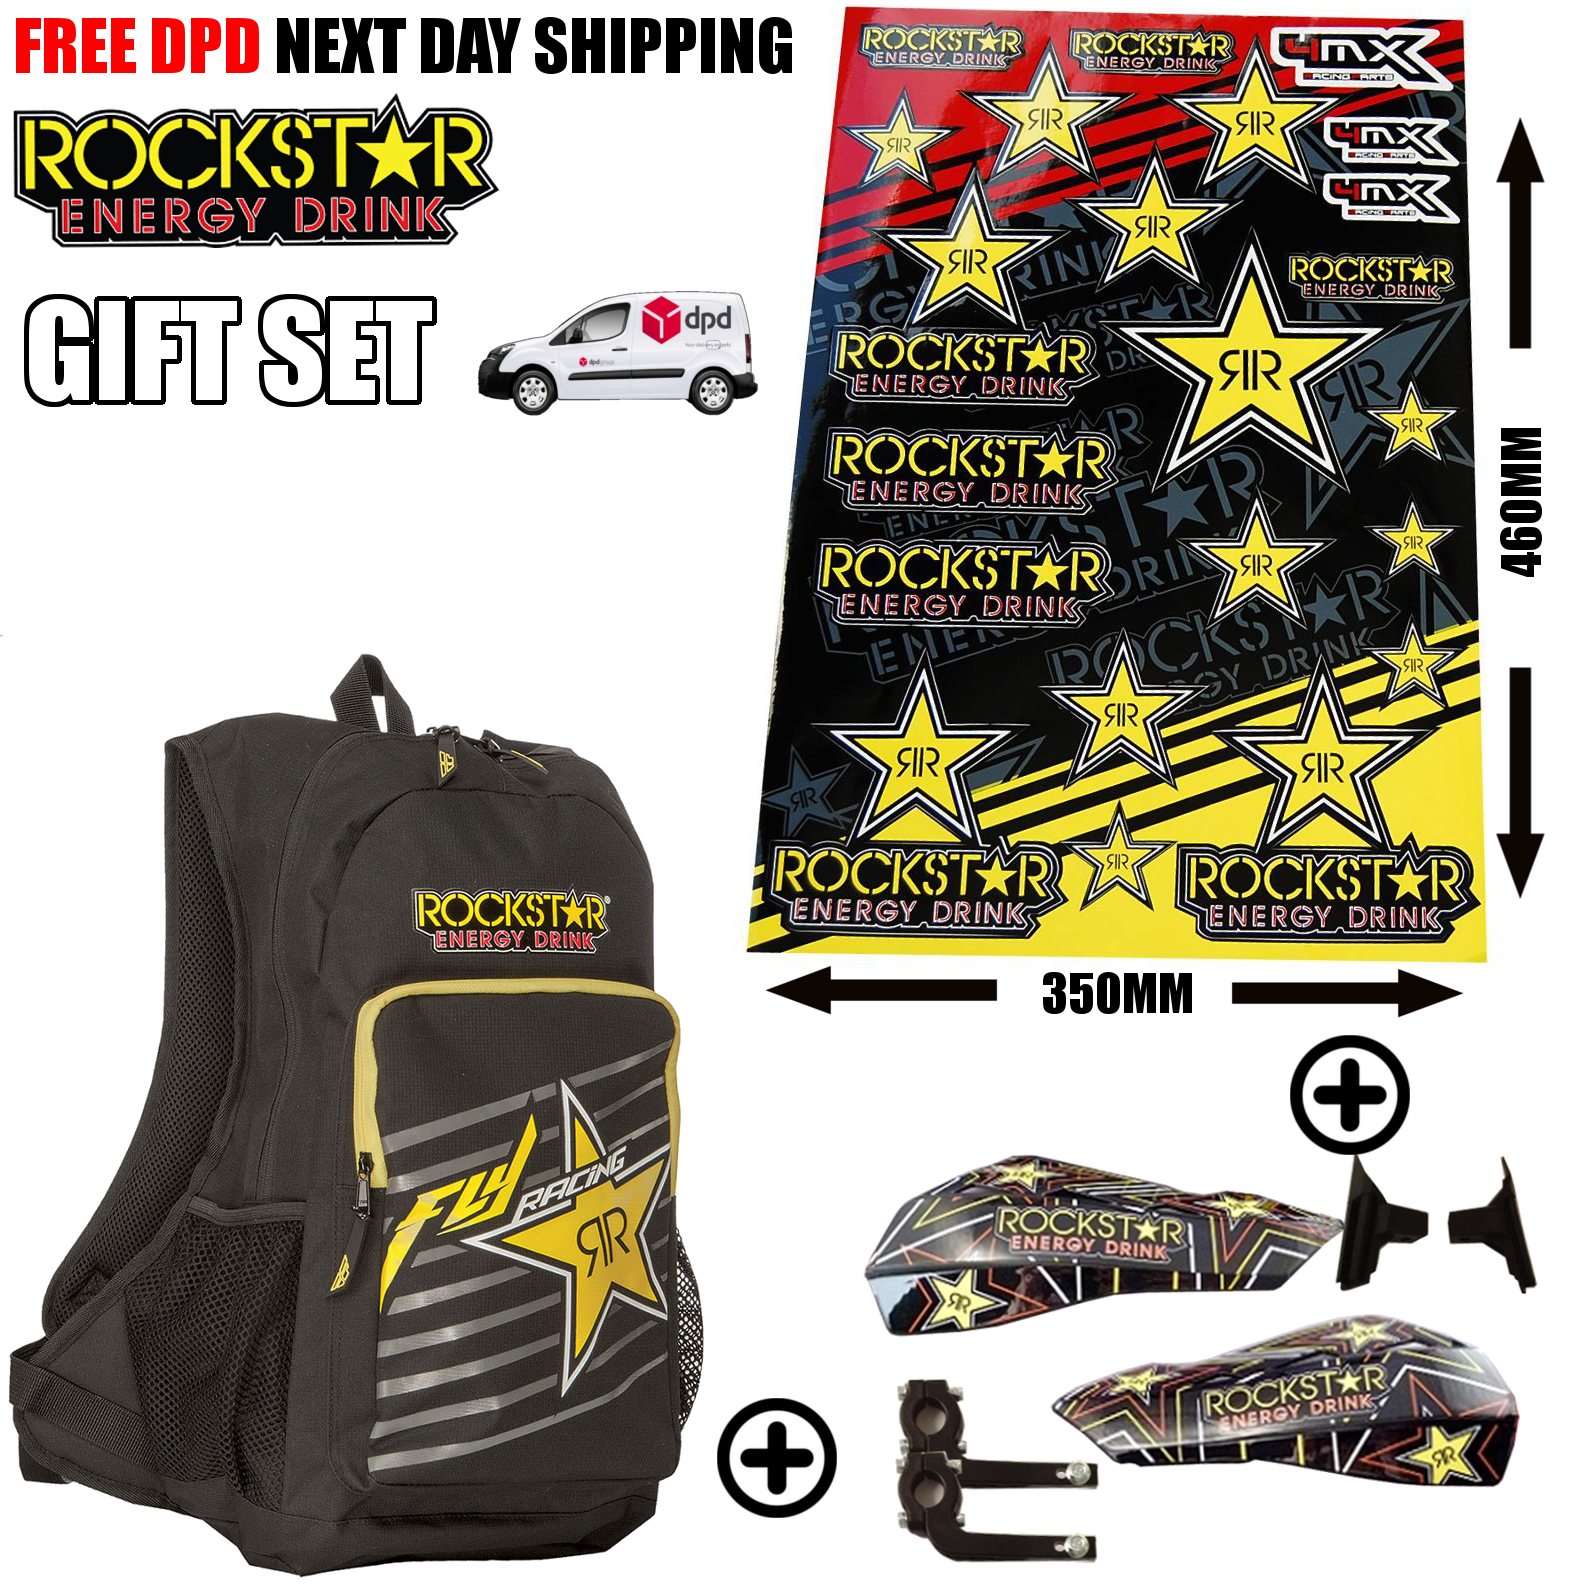 Rockstar Back Pack Motorcycle Gift Set fits KTM 360 SX Motocross 96-97 - Picture 1 of 1